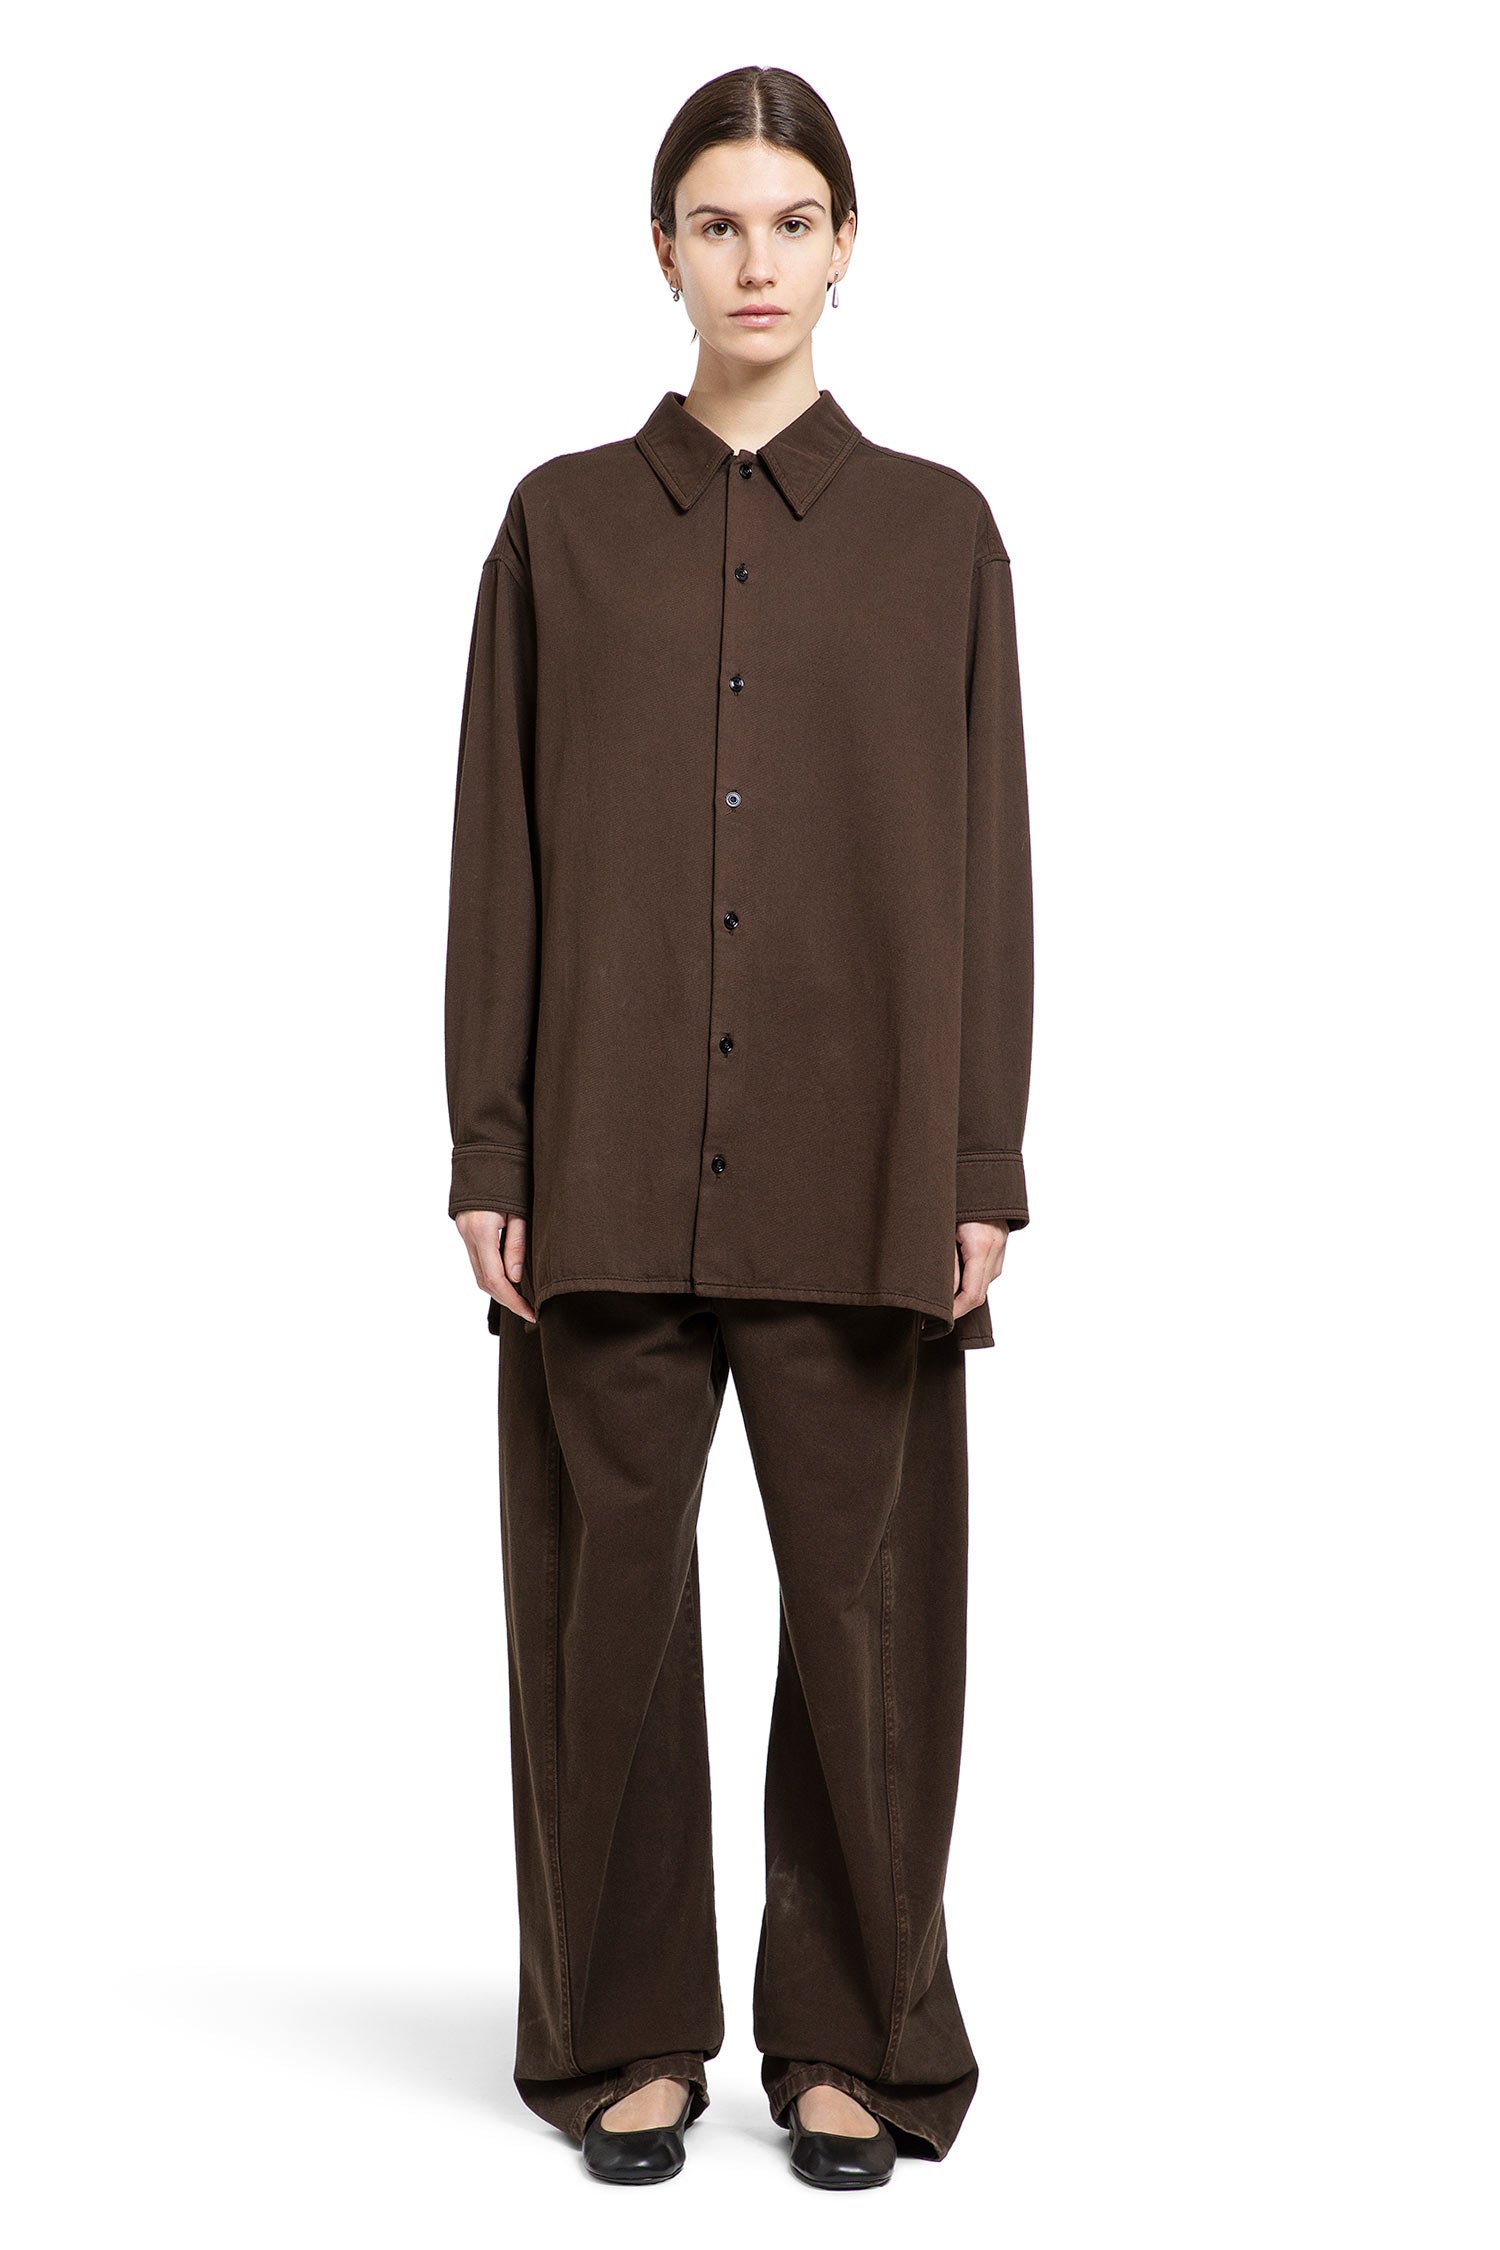 LEMAIRE WOMAN BROWN TROUSERS